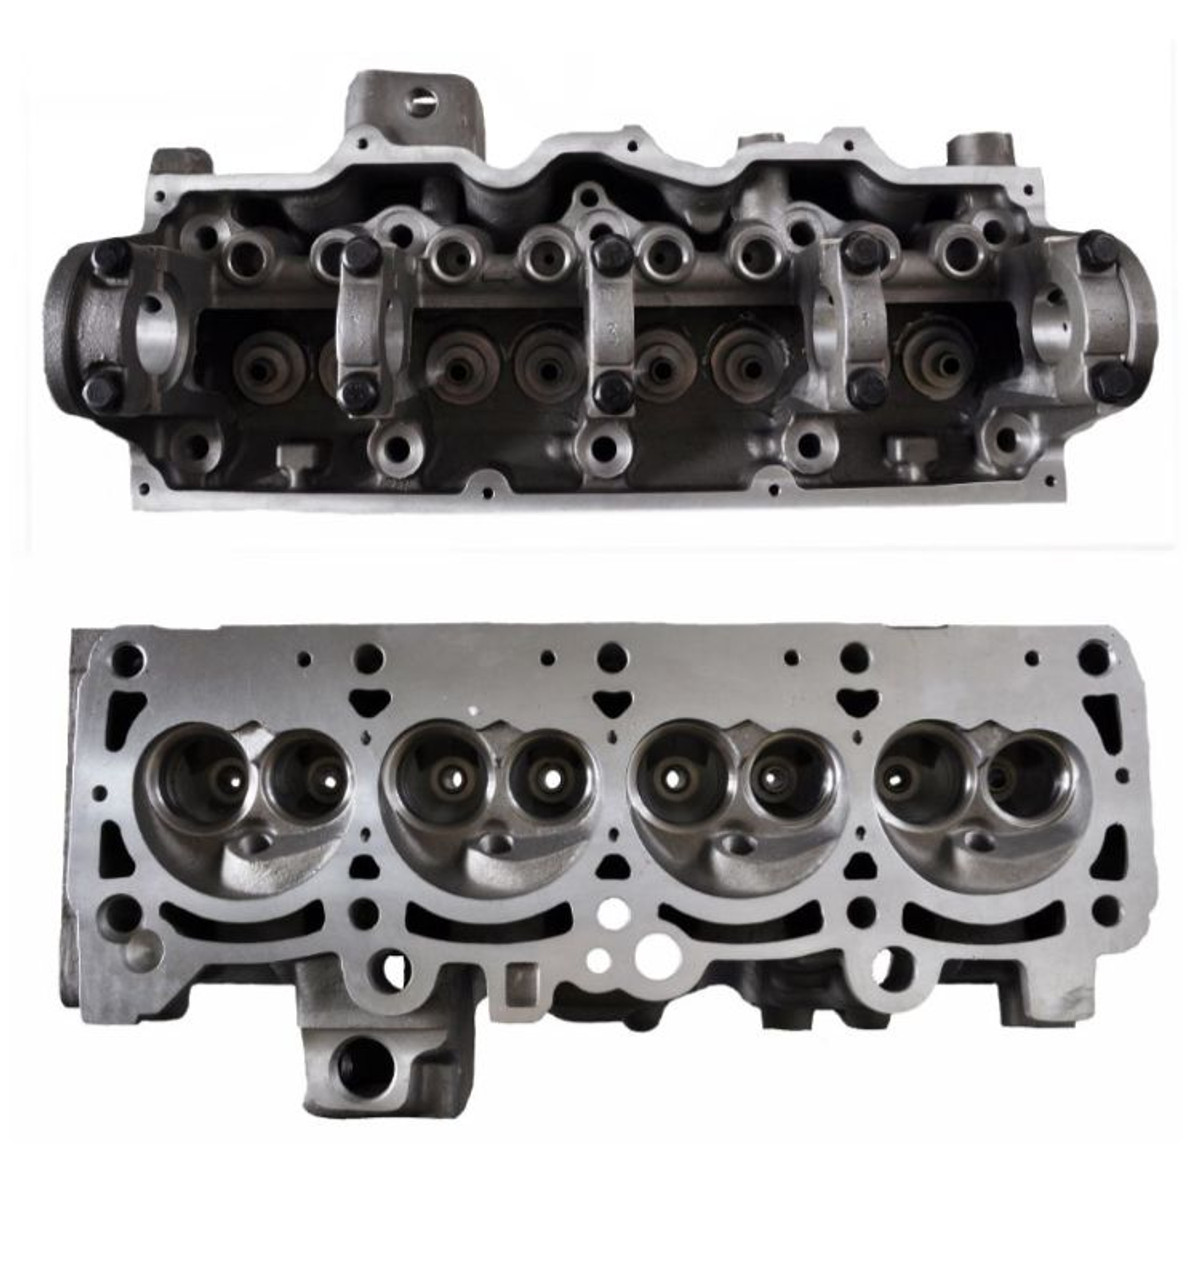 Cylinder Head - 1989 Plymouth Reliant 2.2L (EHCR135-1.J98)